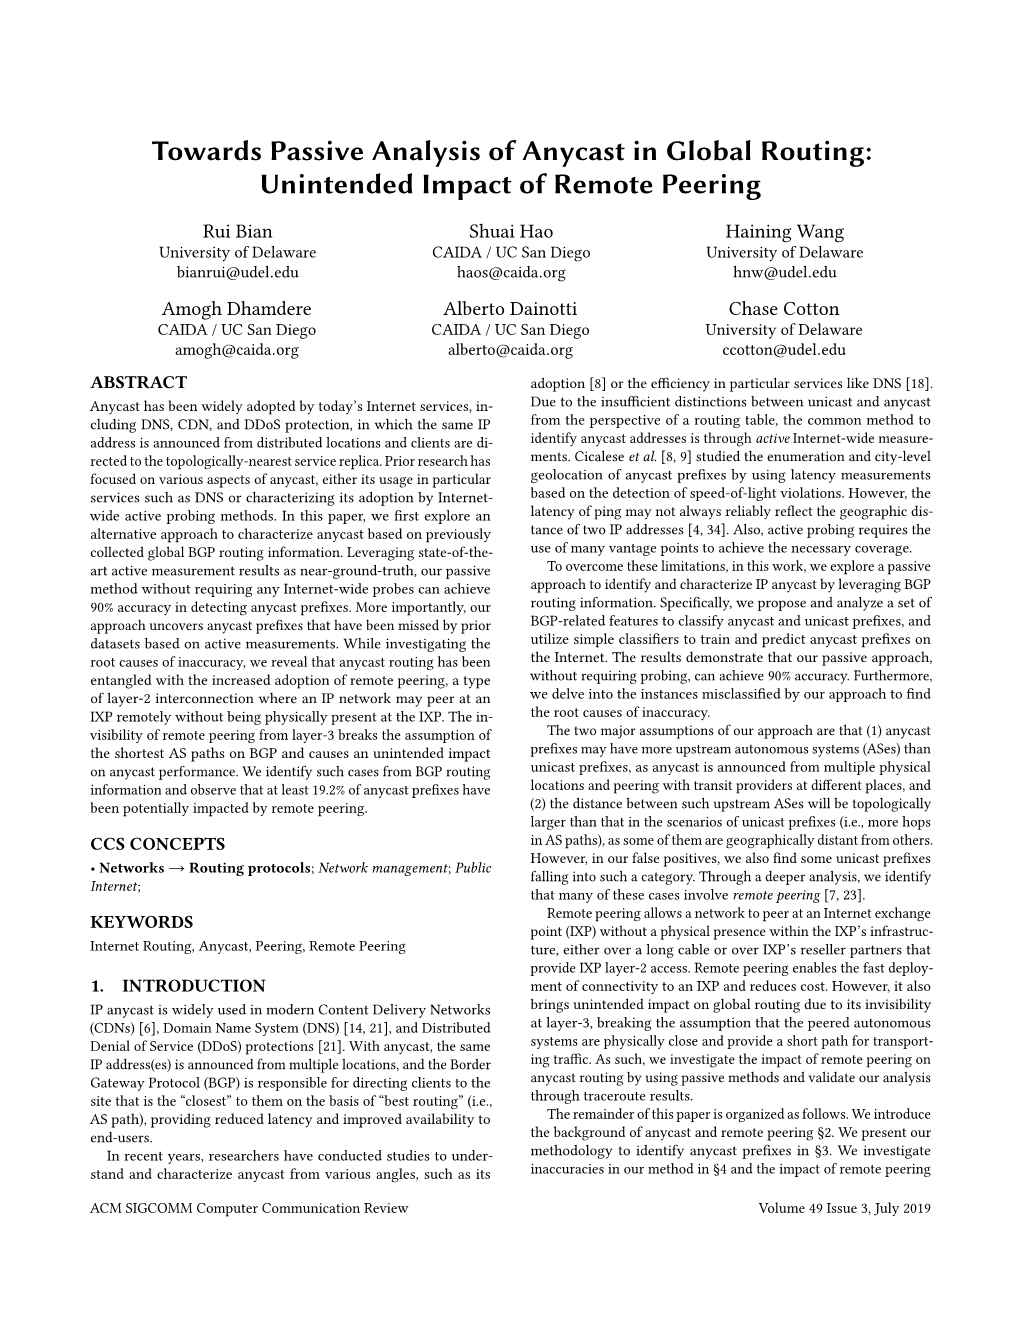 Towards Passive Analysis of Anycast in Global Routing: Unintended Impact of Remote Peering